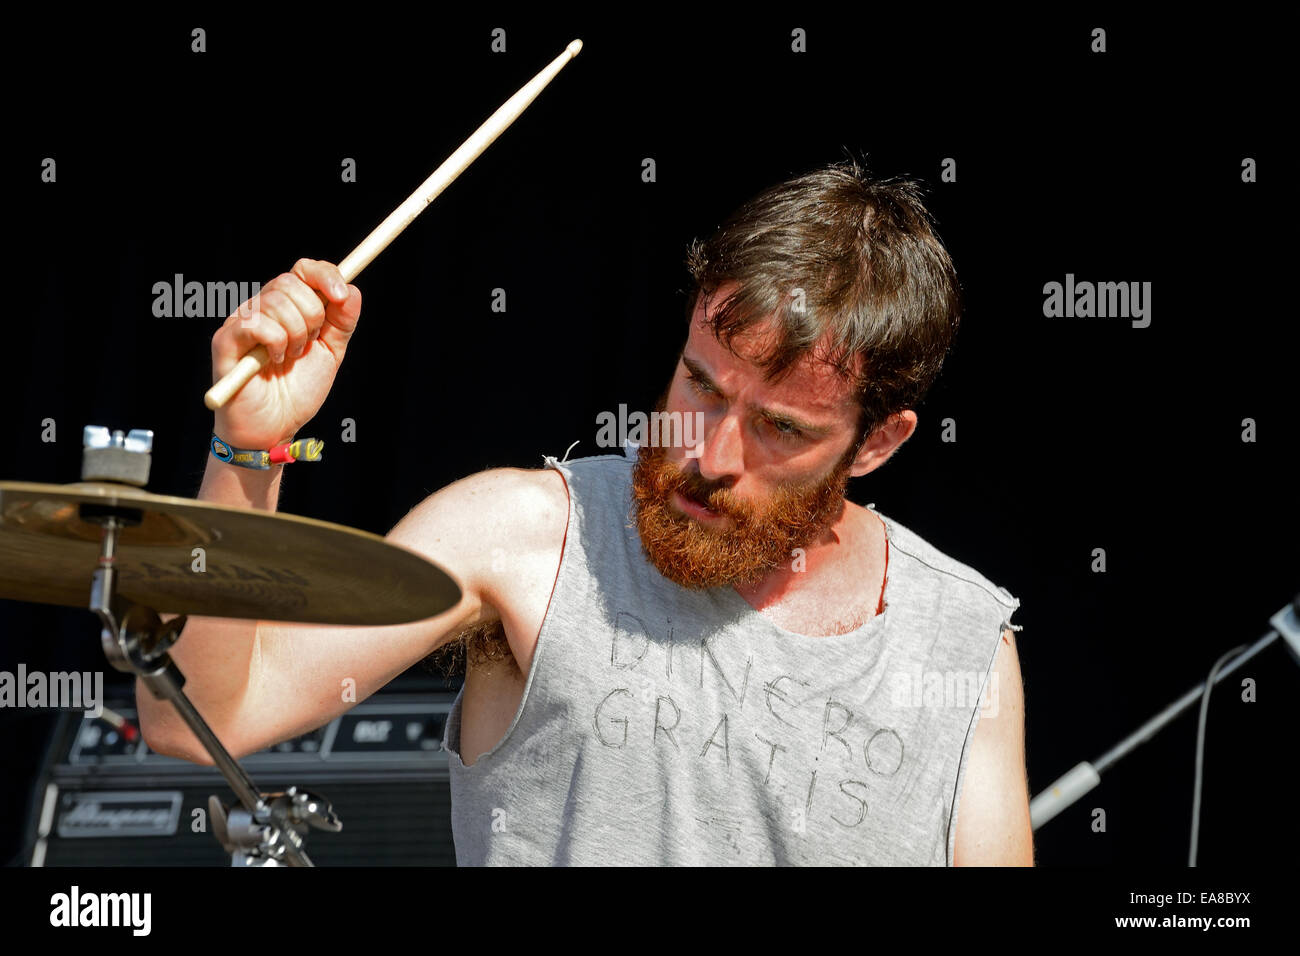 BENICASSIM, SPAIN - JULY 18: Drummer and singer of El Pardo (band) performs at FIB Festival. Stock Photo